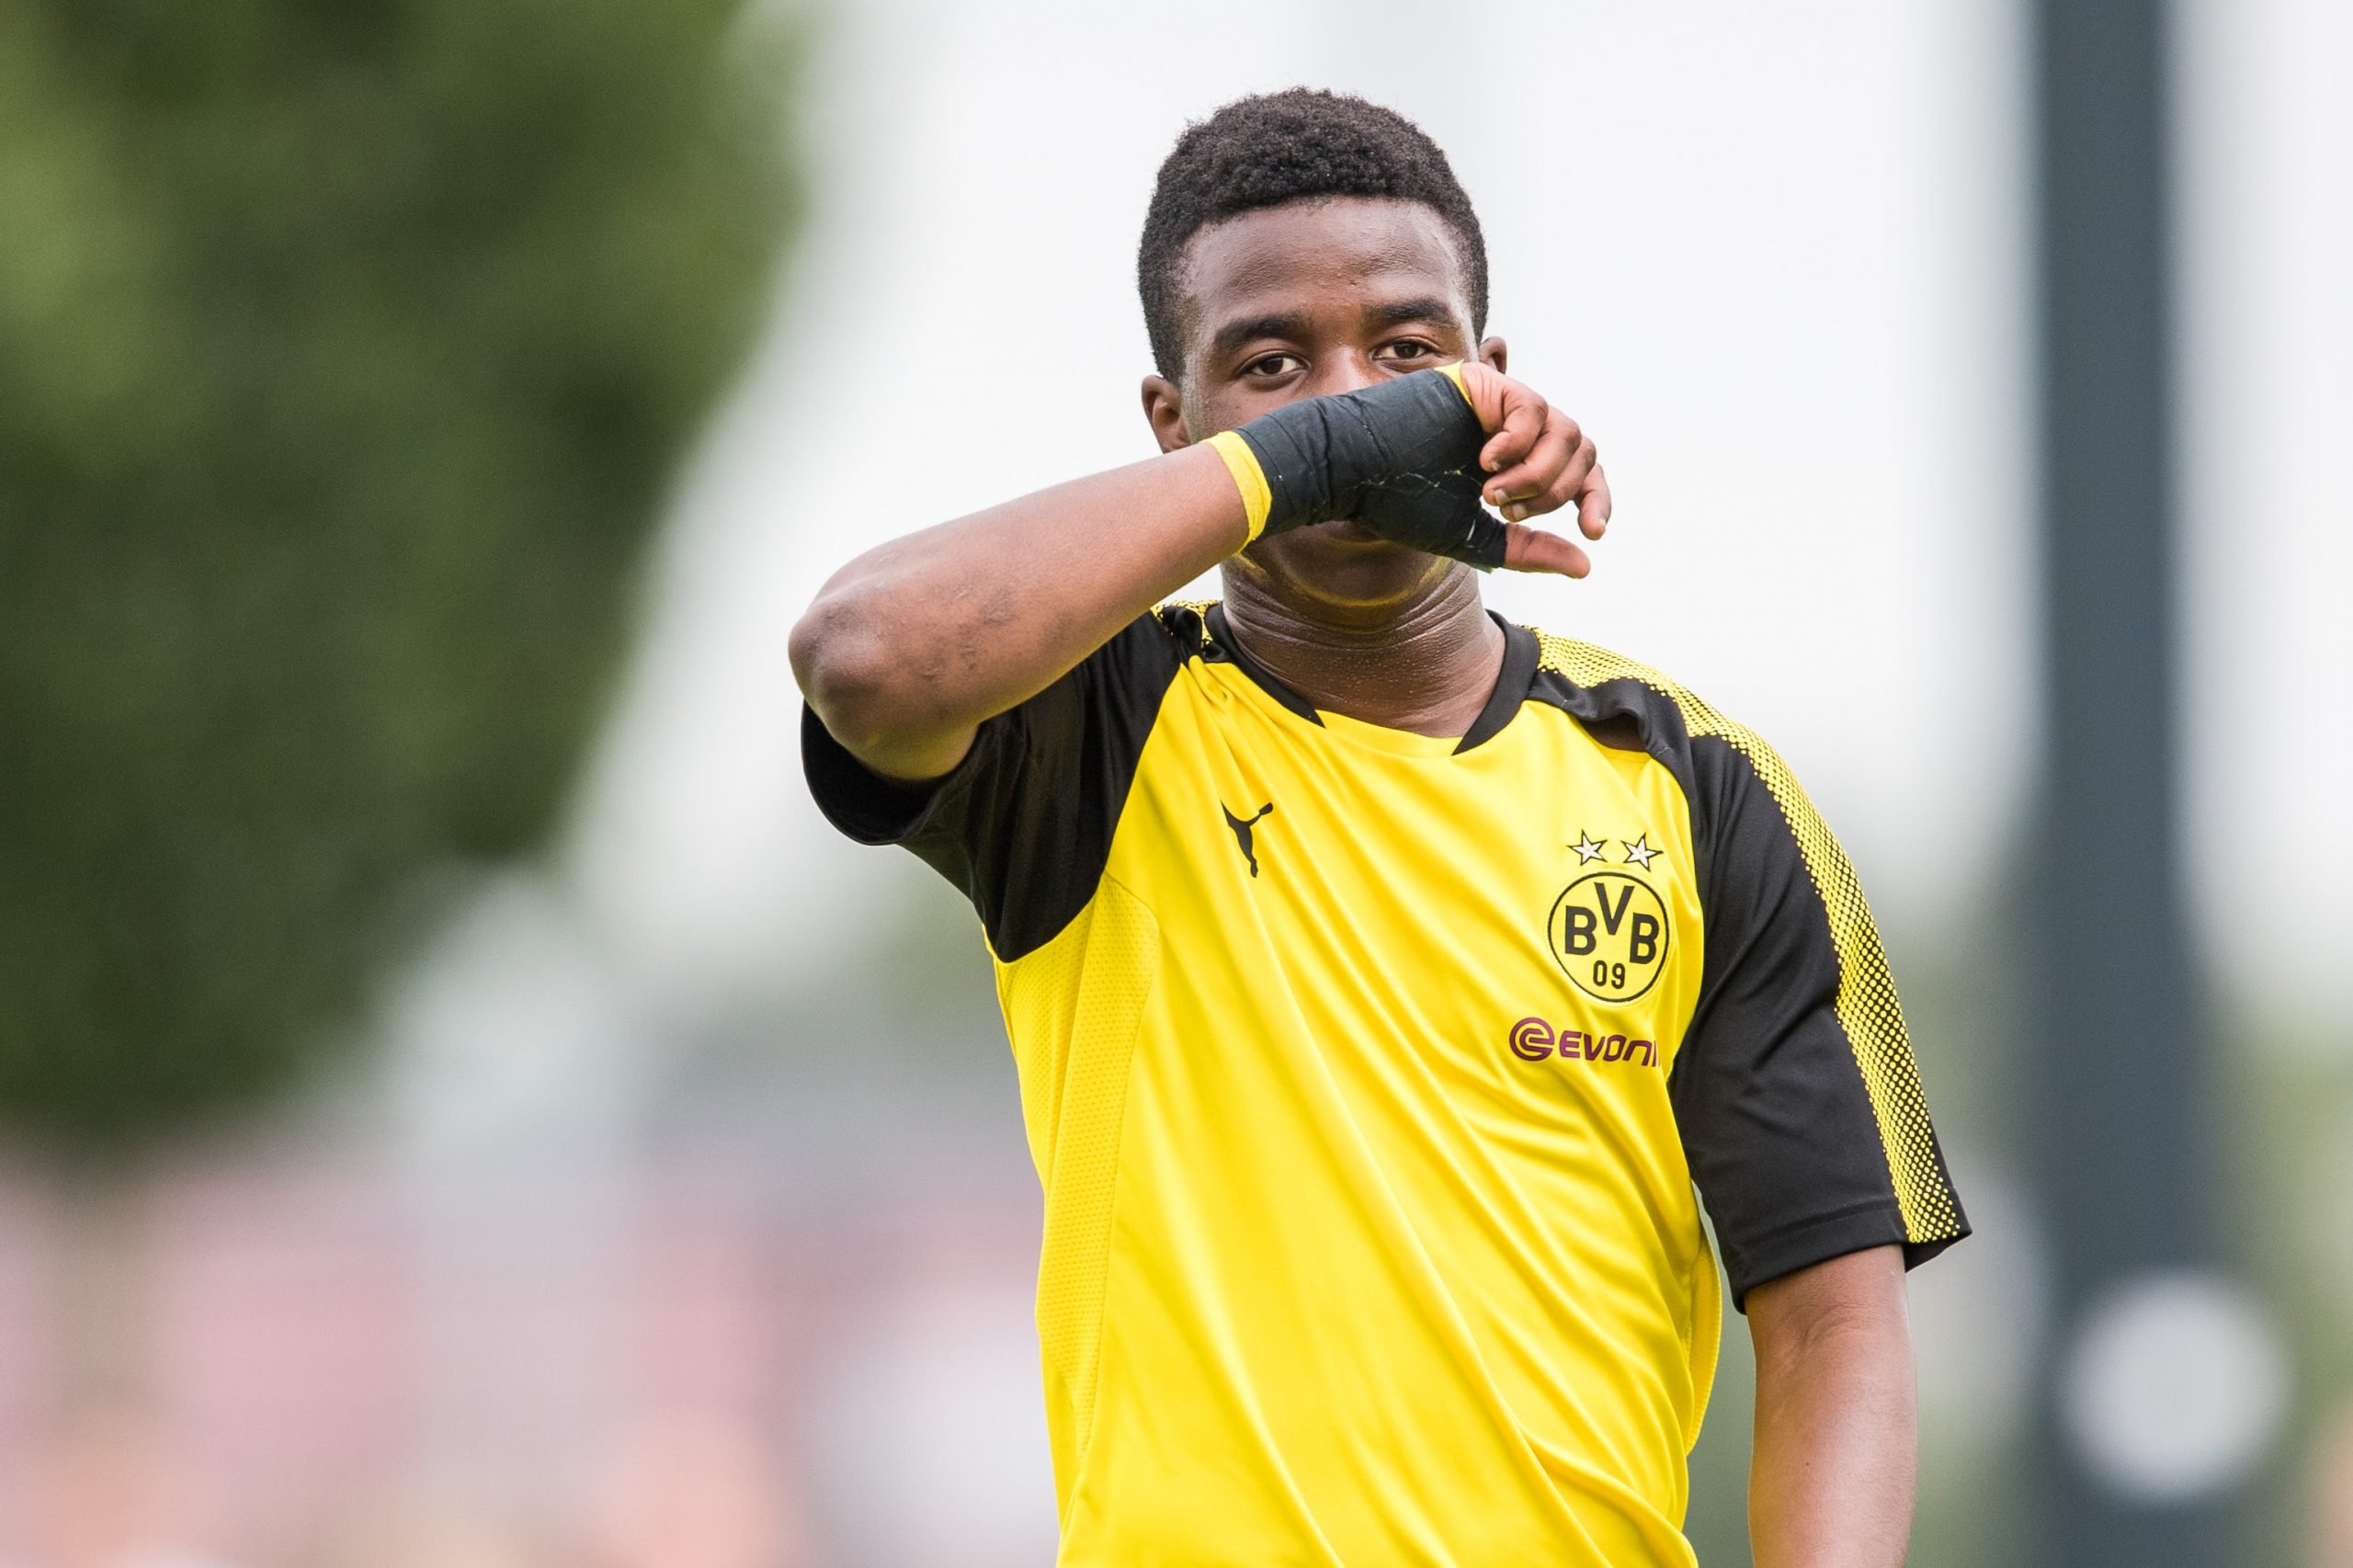 Borussia Dortmund chief willing to put his faith on Moukoko who is seen in the picture